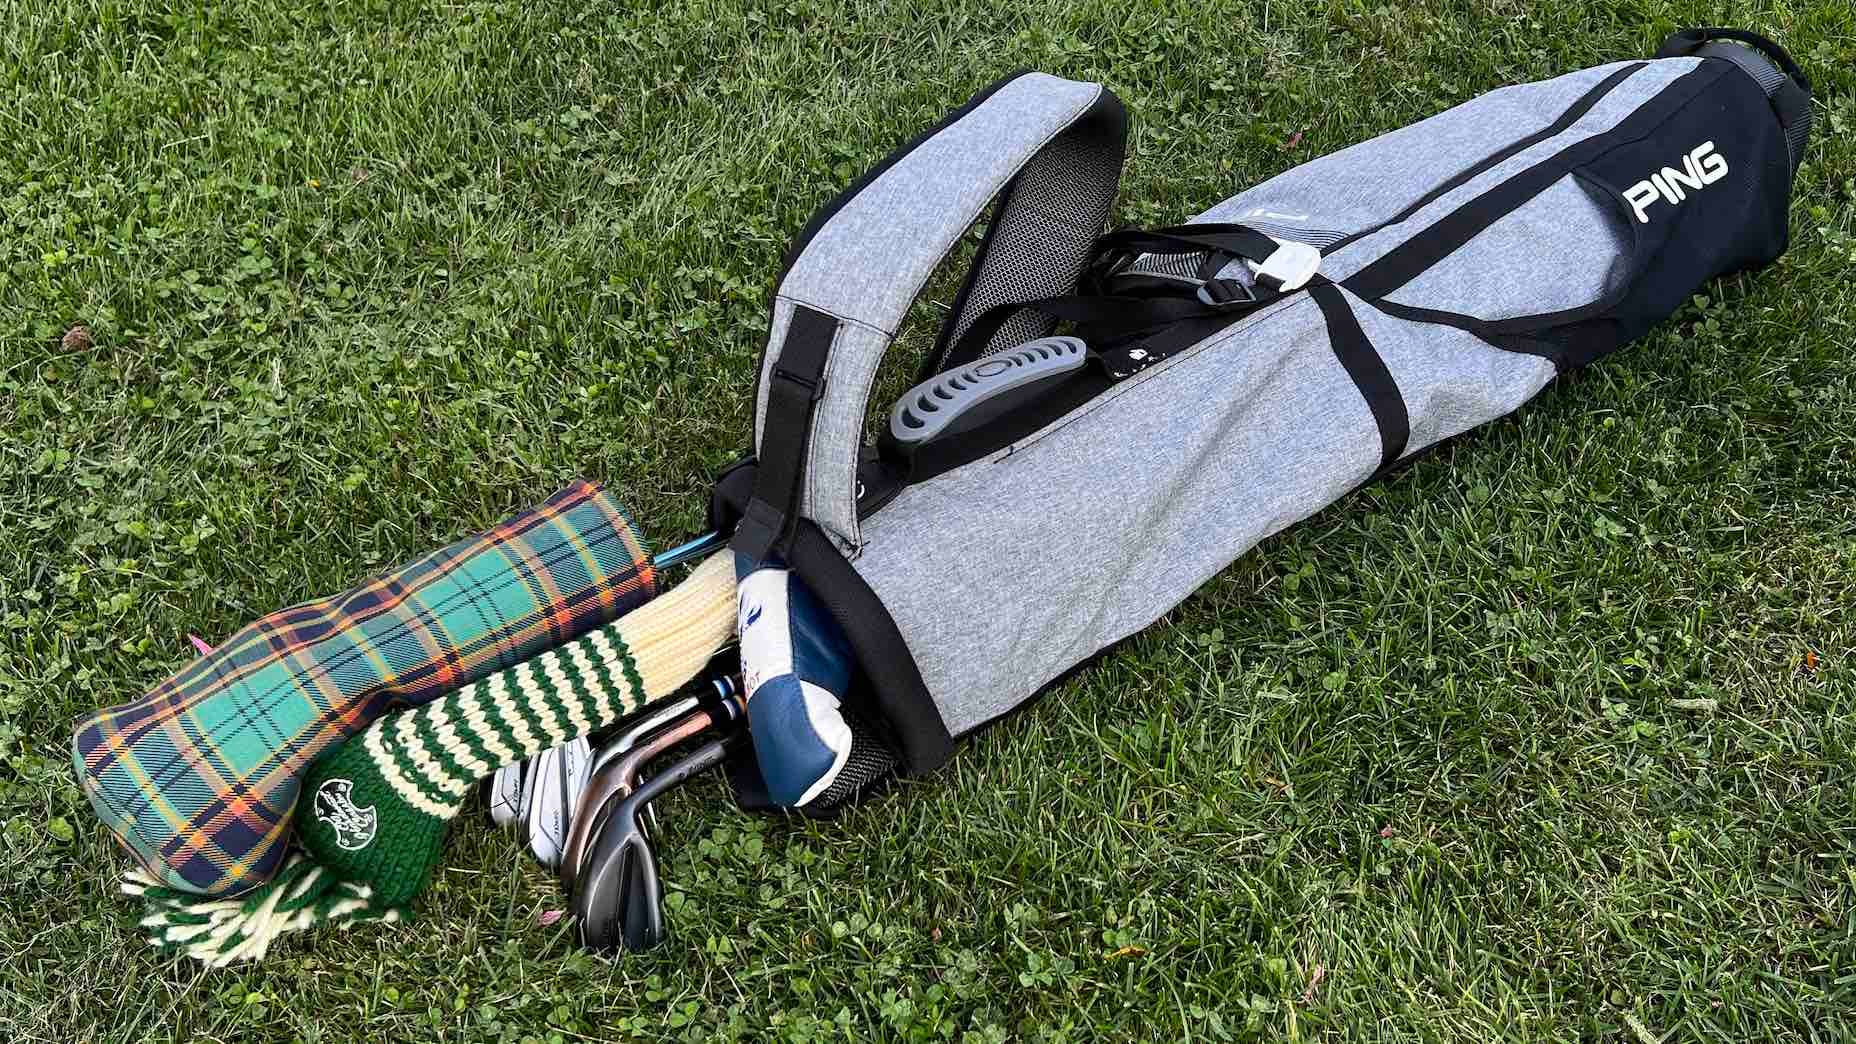 Top Picks for the Best Sunday Golf Bag Lightweight and Stylish Options